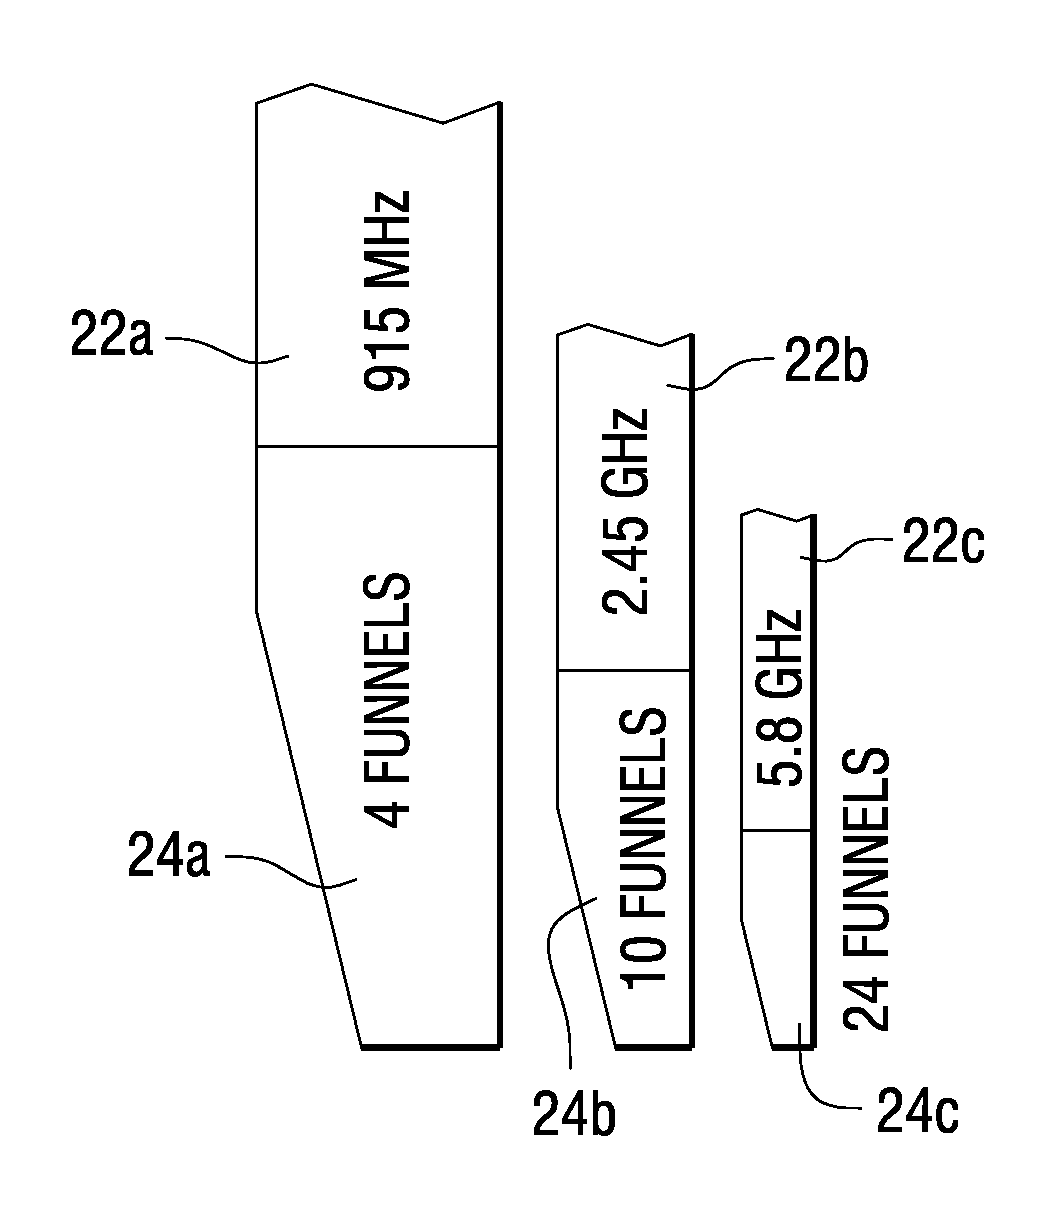 Apparatus for in-situ microwave consolidation of planetary materials containing nano-sized metallic iron particles